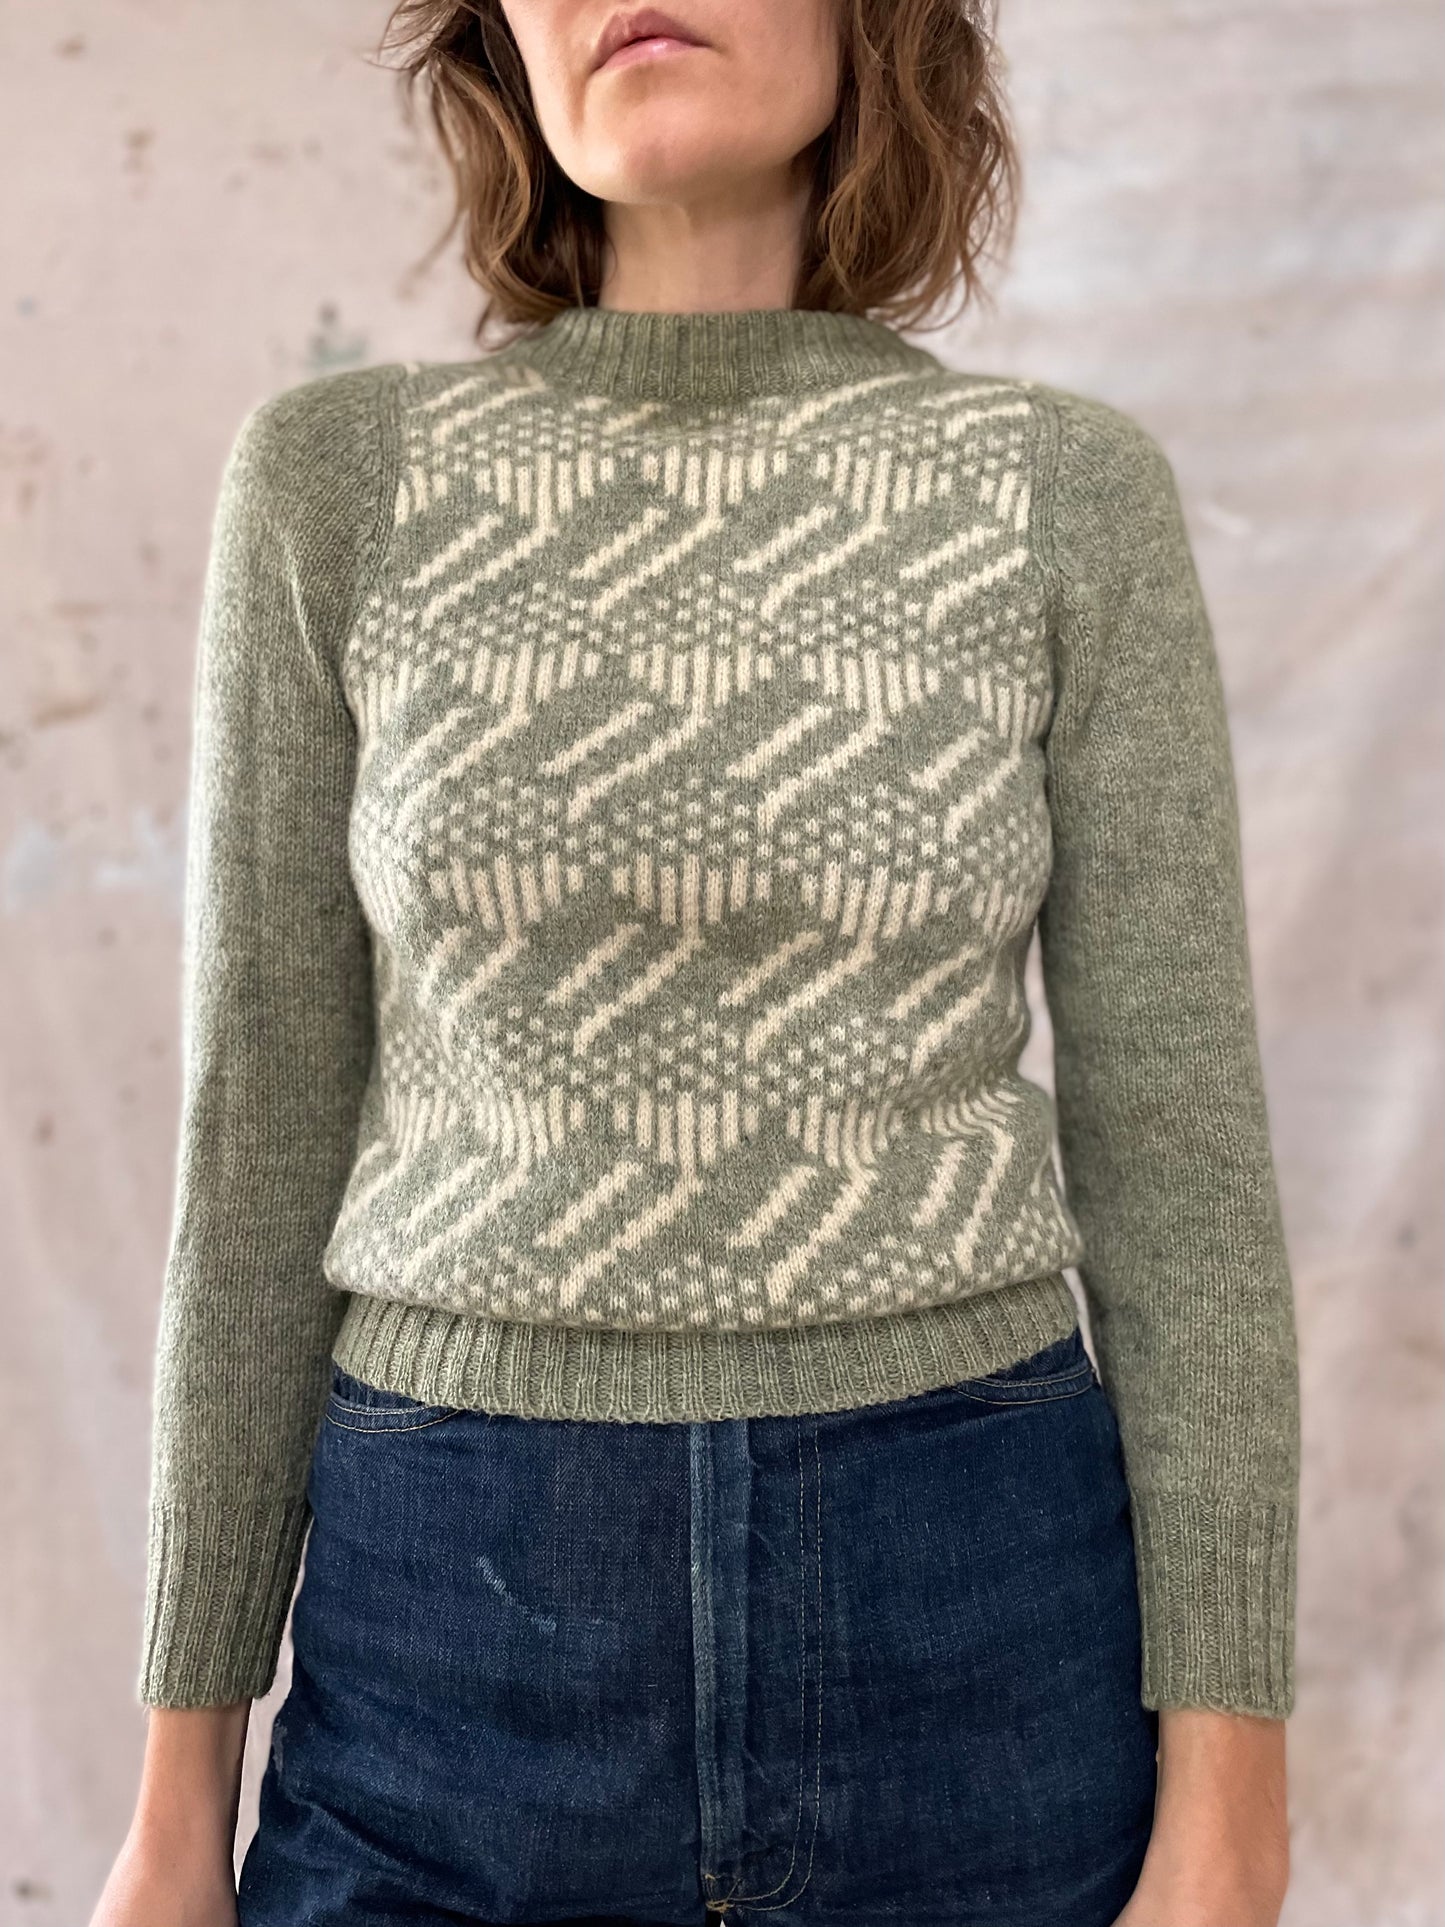 Green and Ivory Scottish Knit Sweater